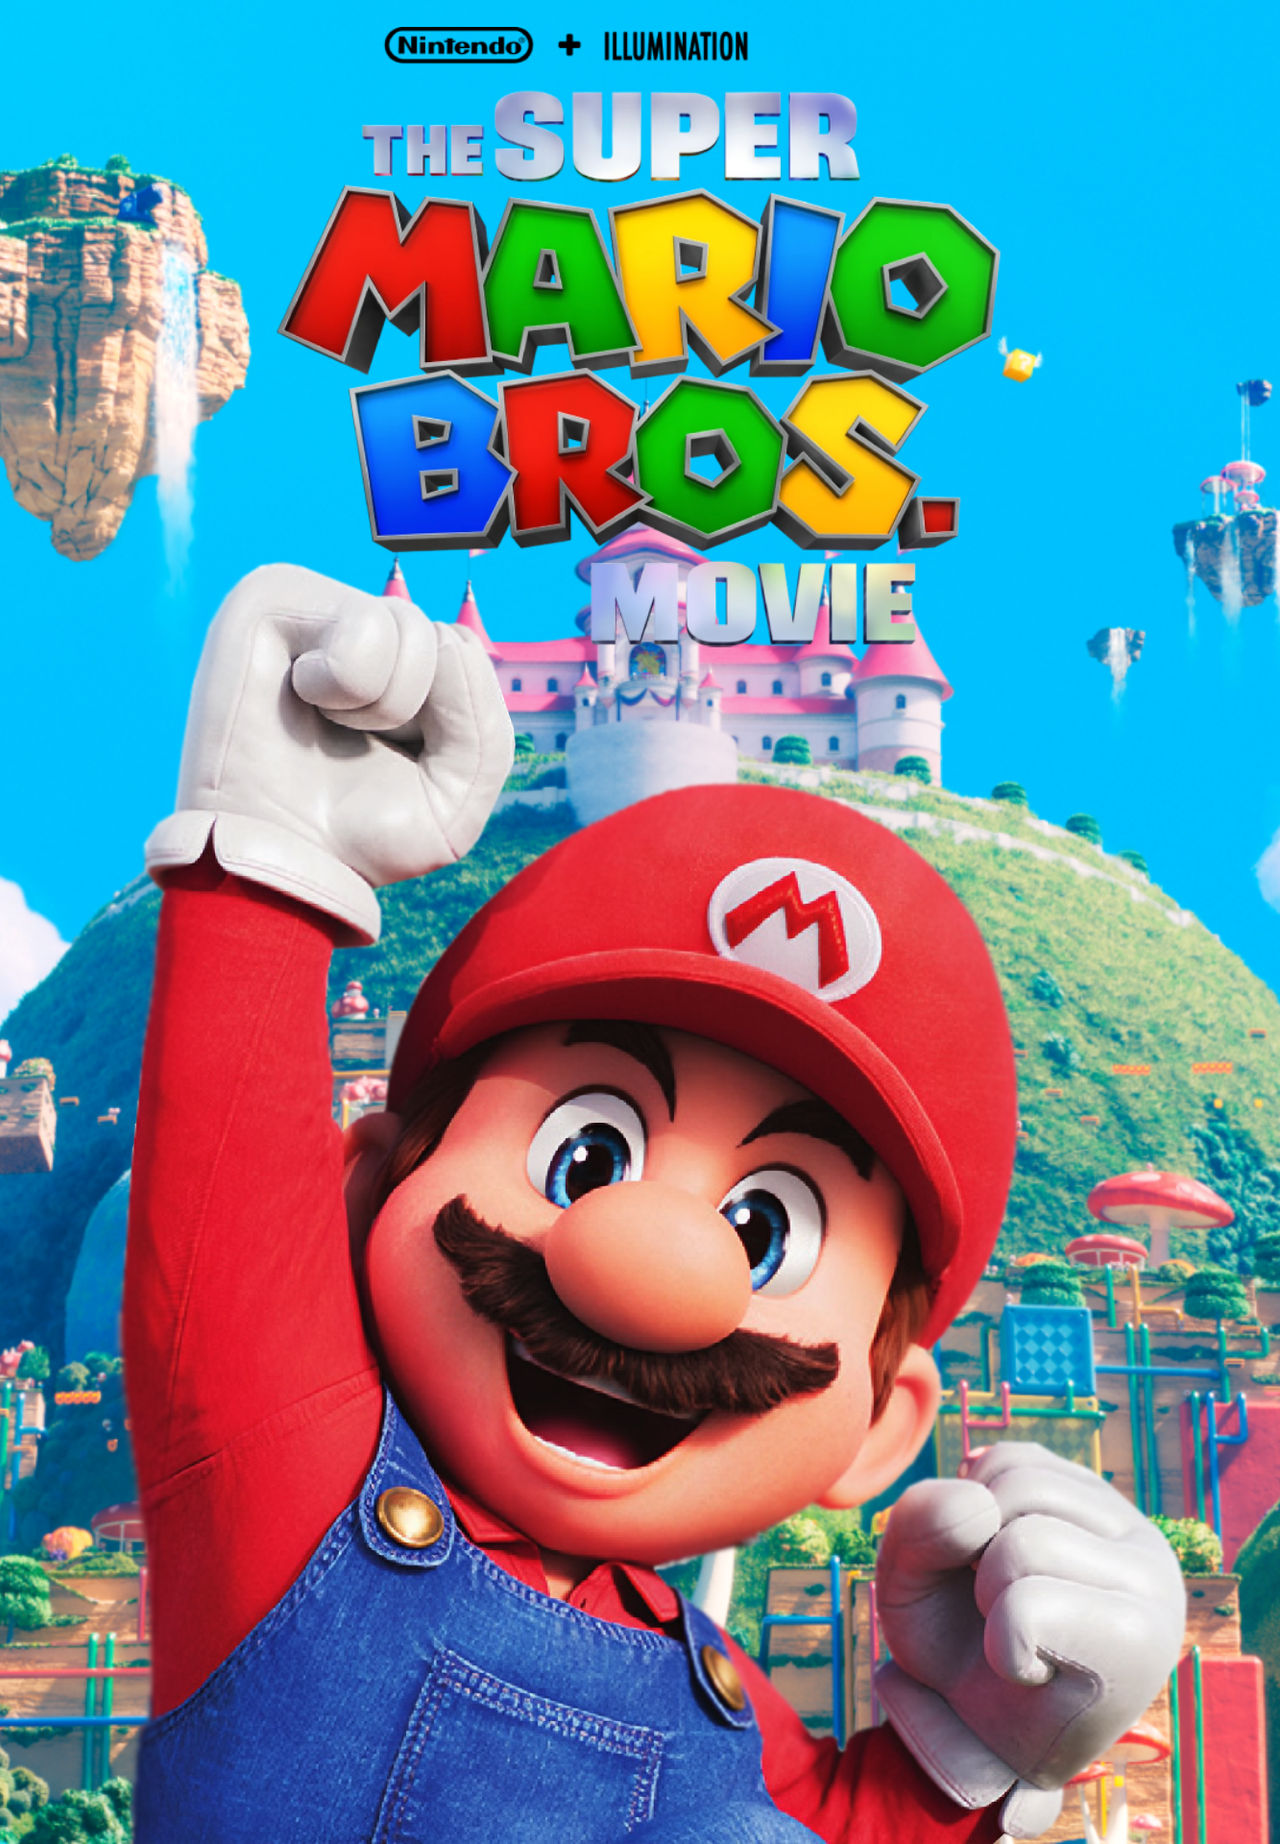 Every Super Mario Bros. Movie Poster To Get Nintendo Fans Excited